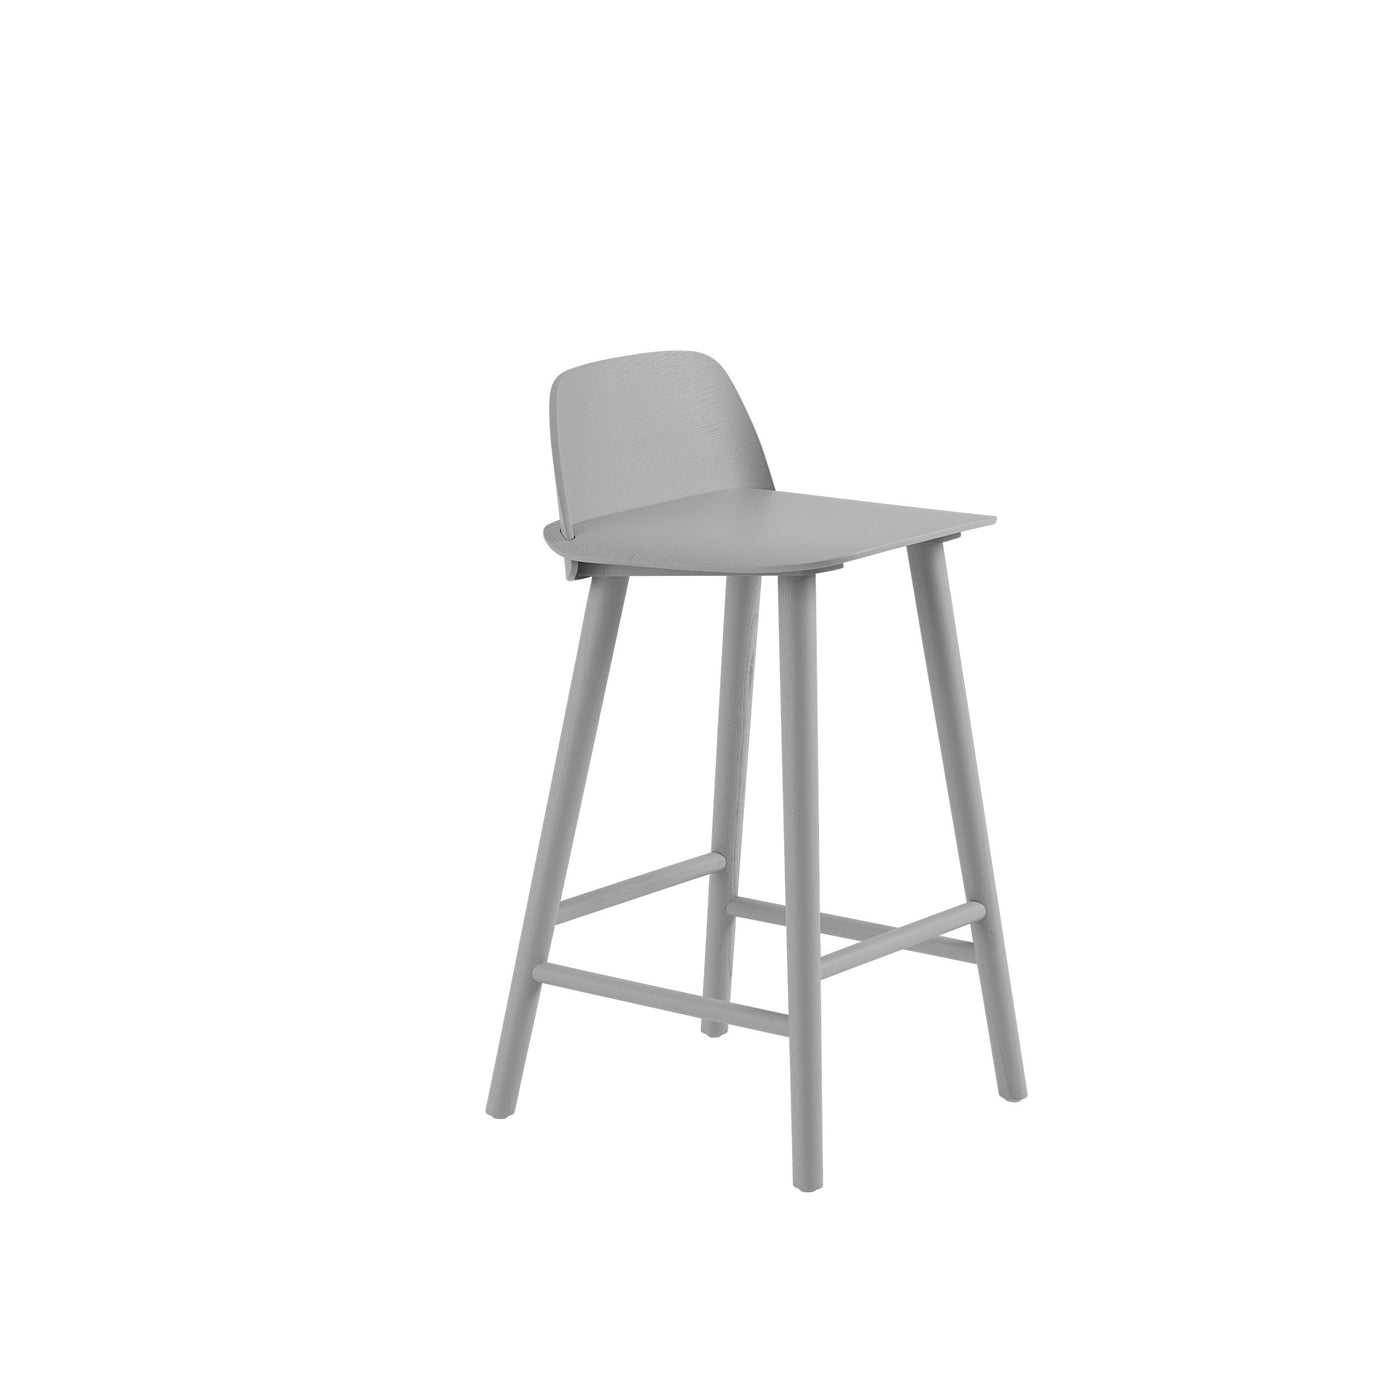 Muuto Nerd Counter stool. Shop online at someday designs. #colour_grey